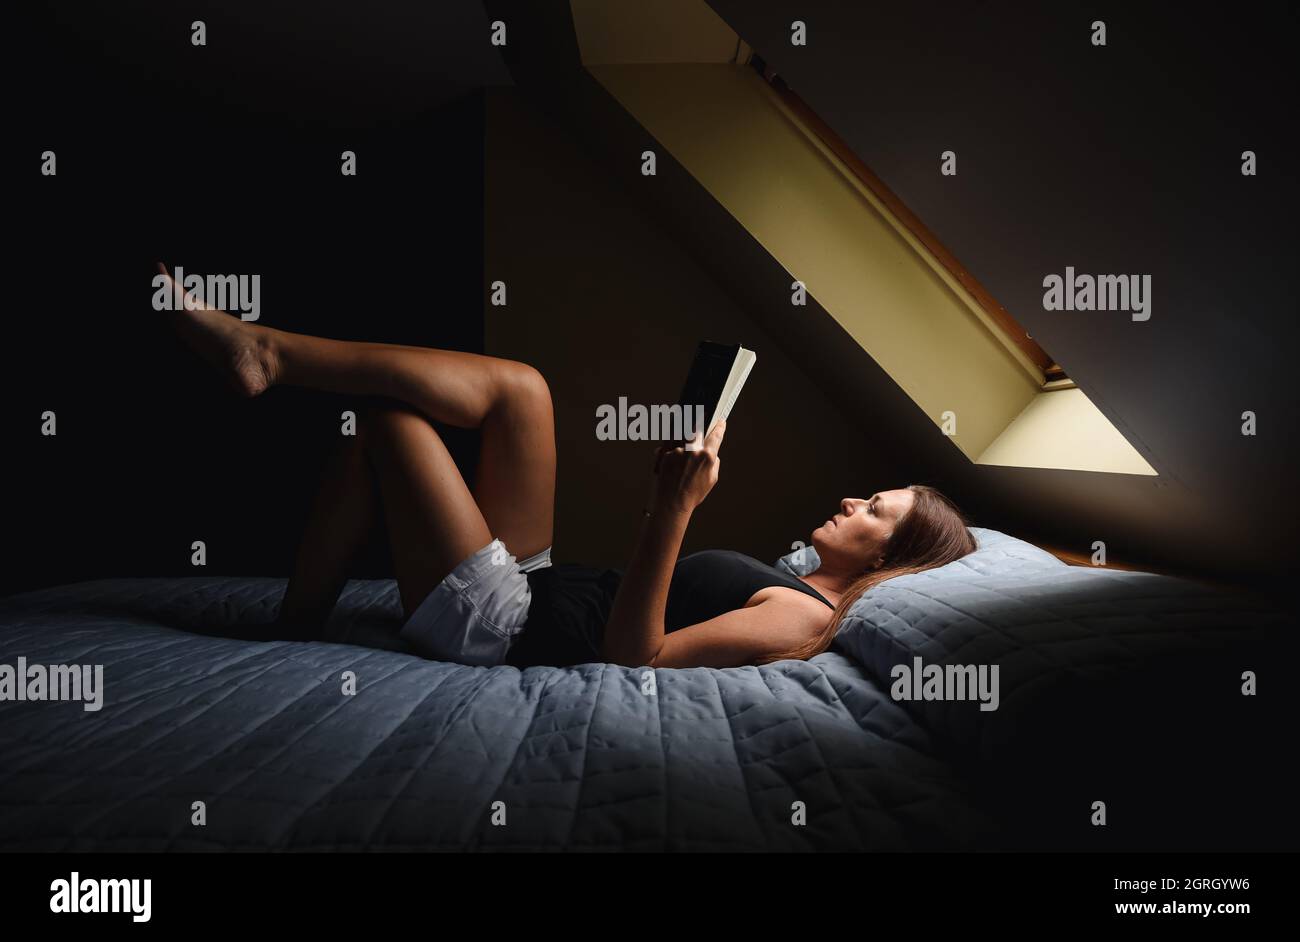 Woman laying on bed reading a book under a window in a dark room. Stock Photo